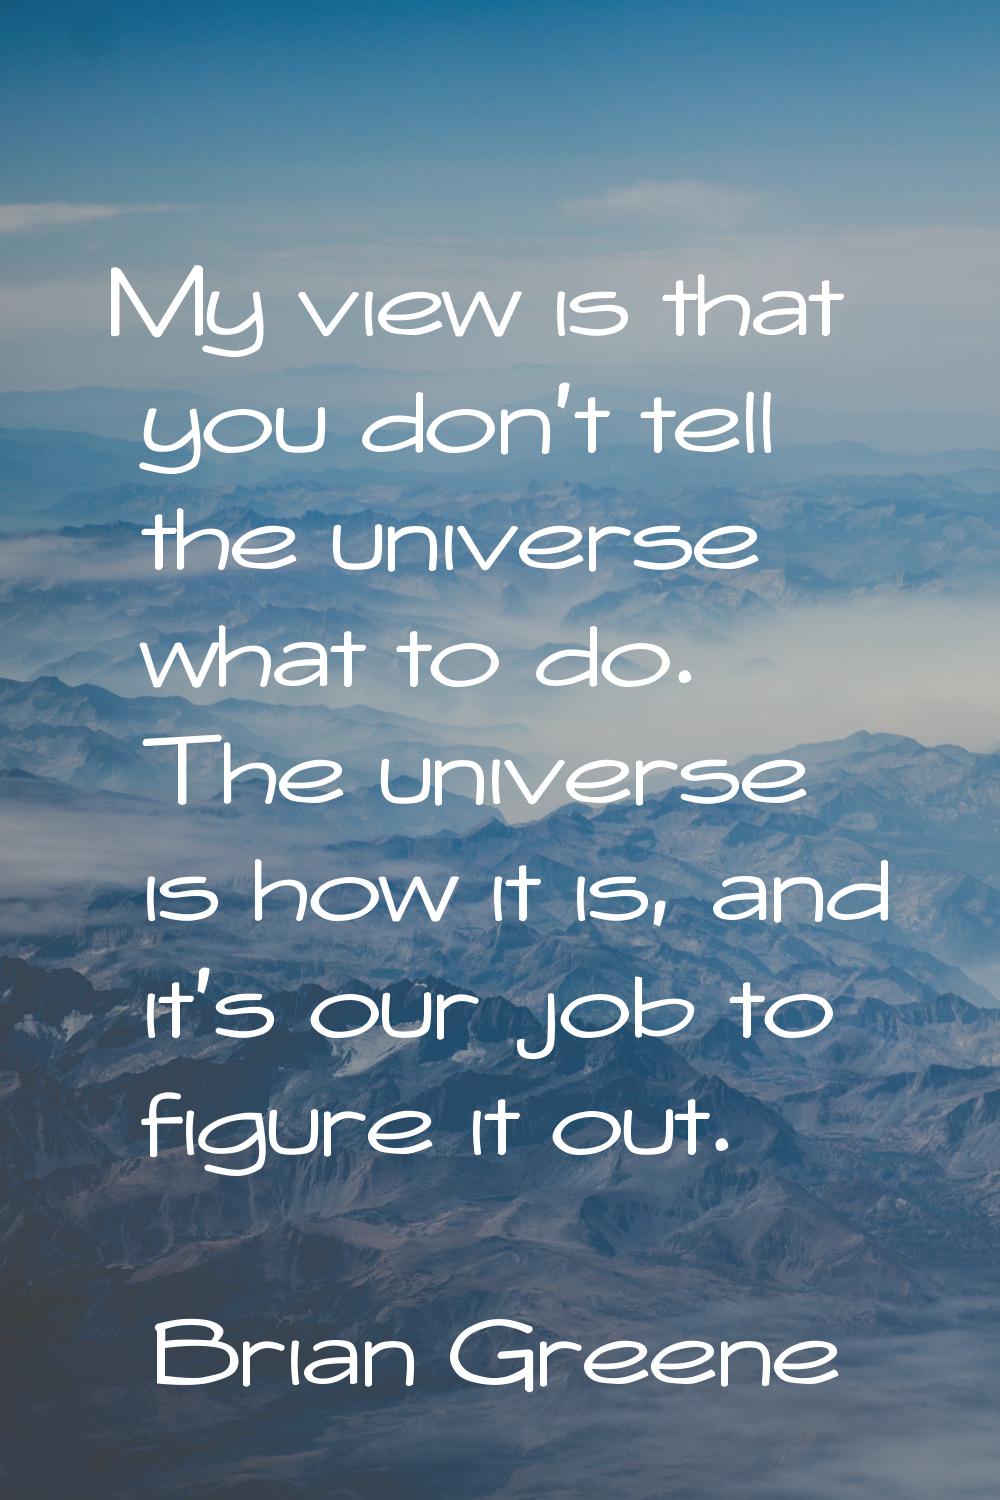 My view is that you don't tell the universe what to do. The universe is how it is, and it's our job